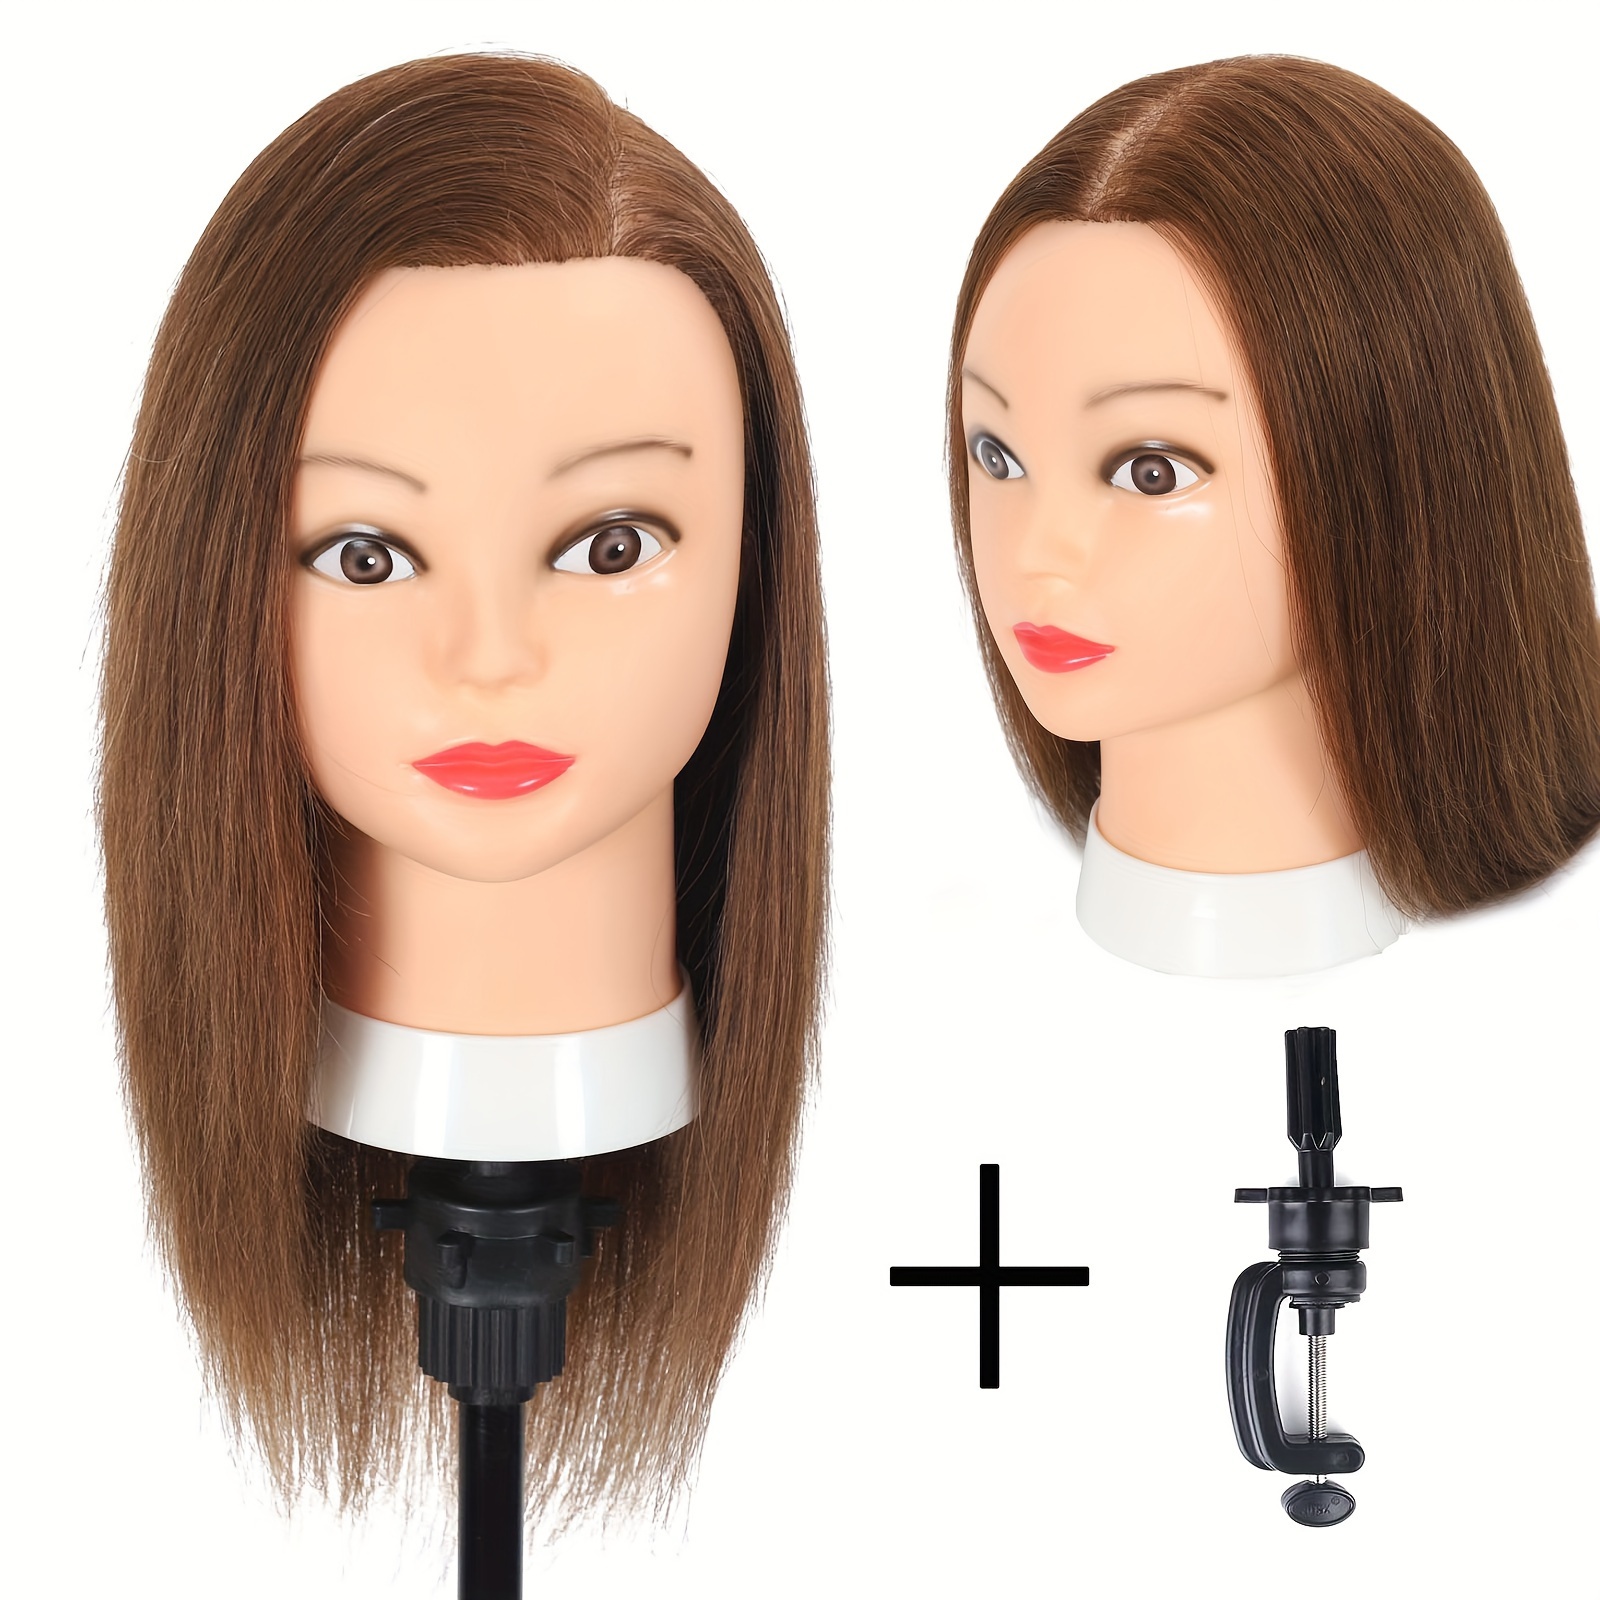 Mannequin Head with Human Hair Trainning Head Mannequin Head with Hair Stand Pratice Head Doll Head for Hair Styling with Free Clamp Holder